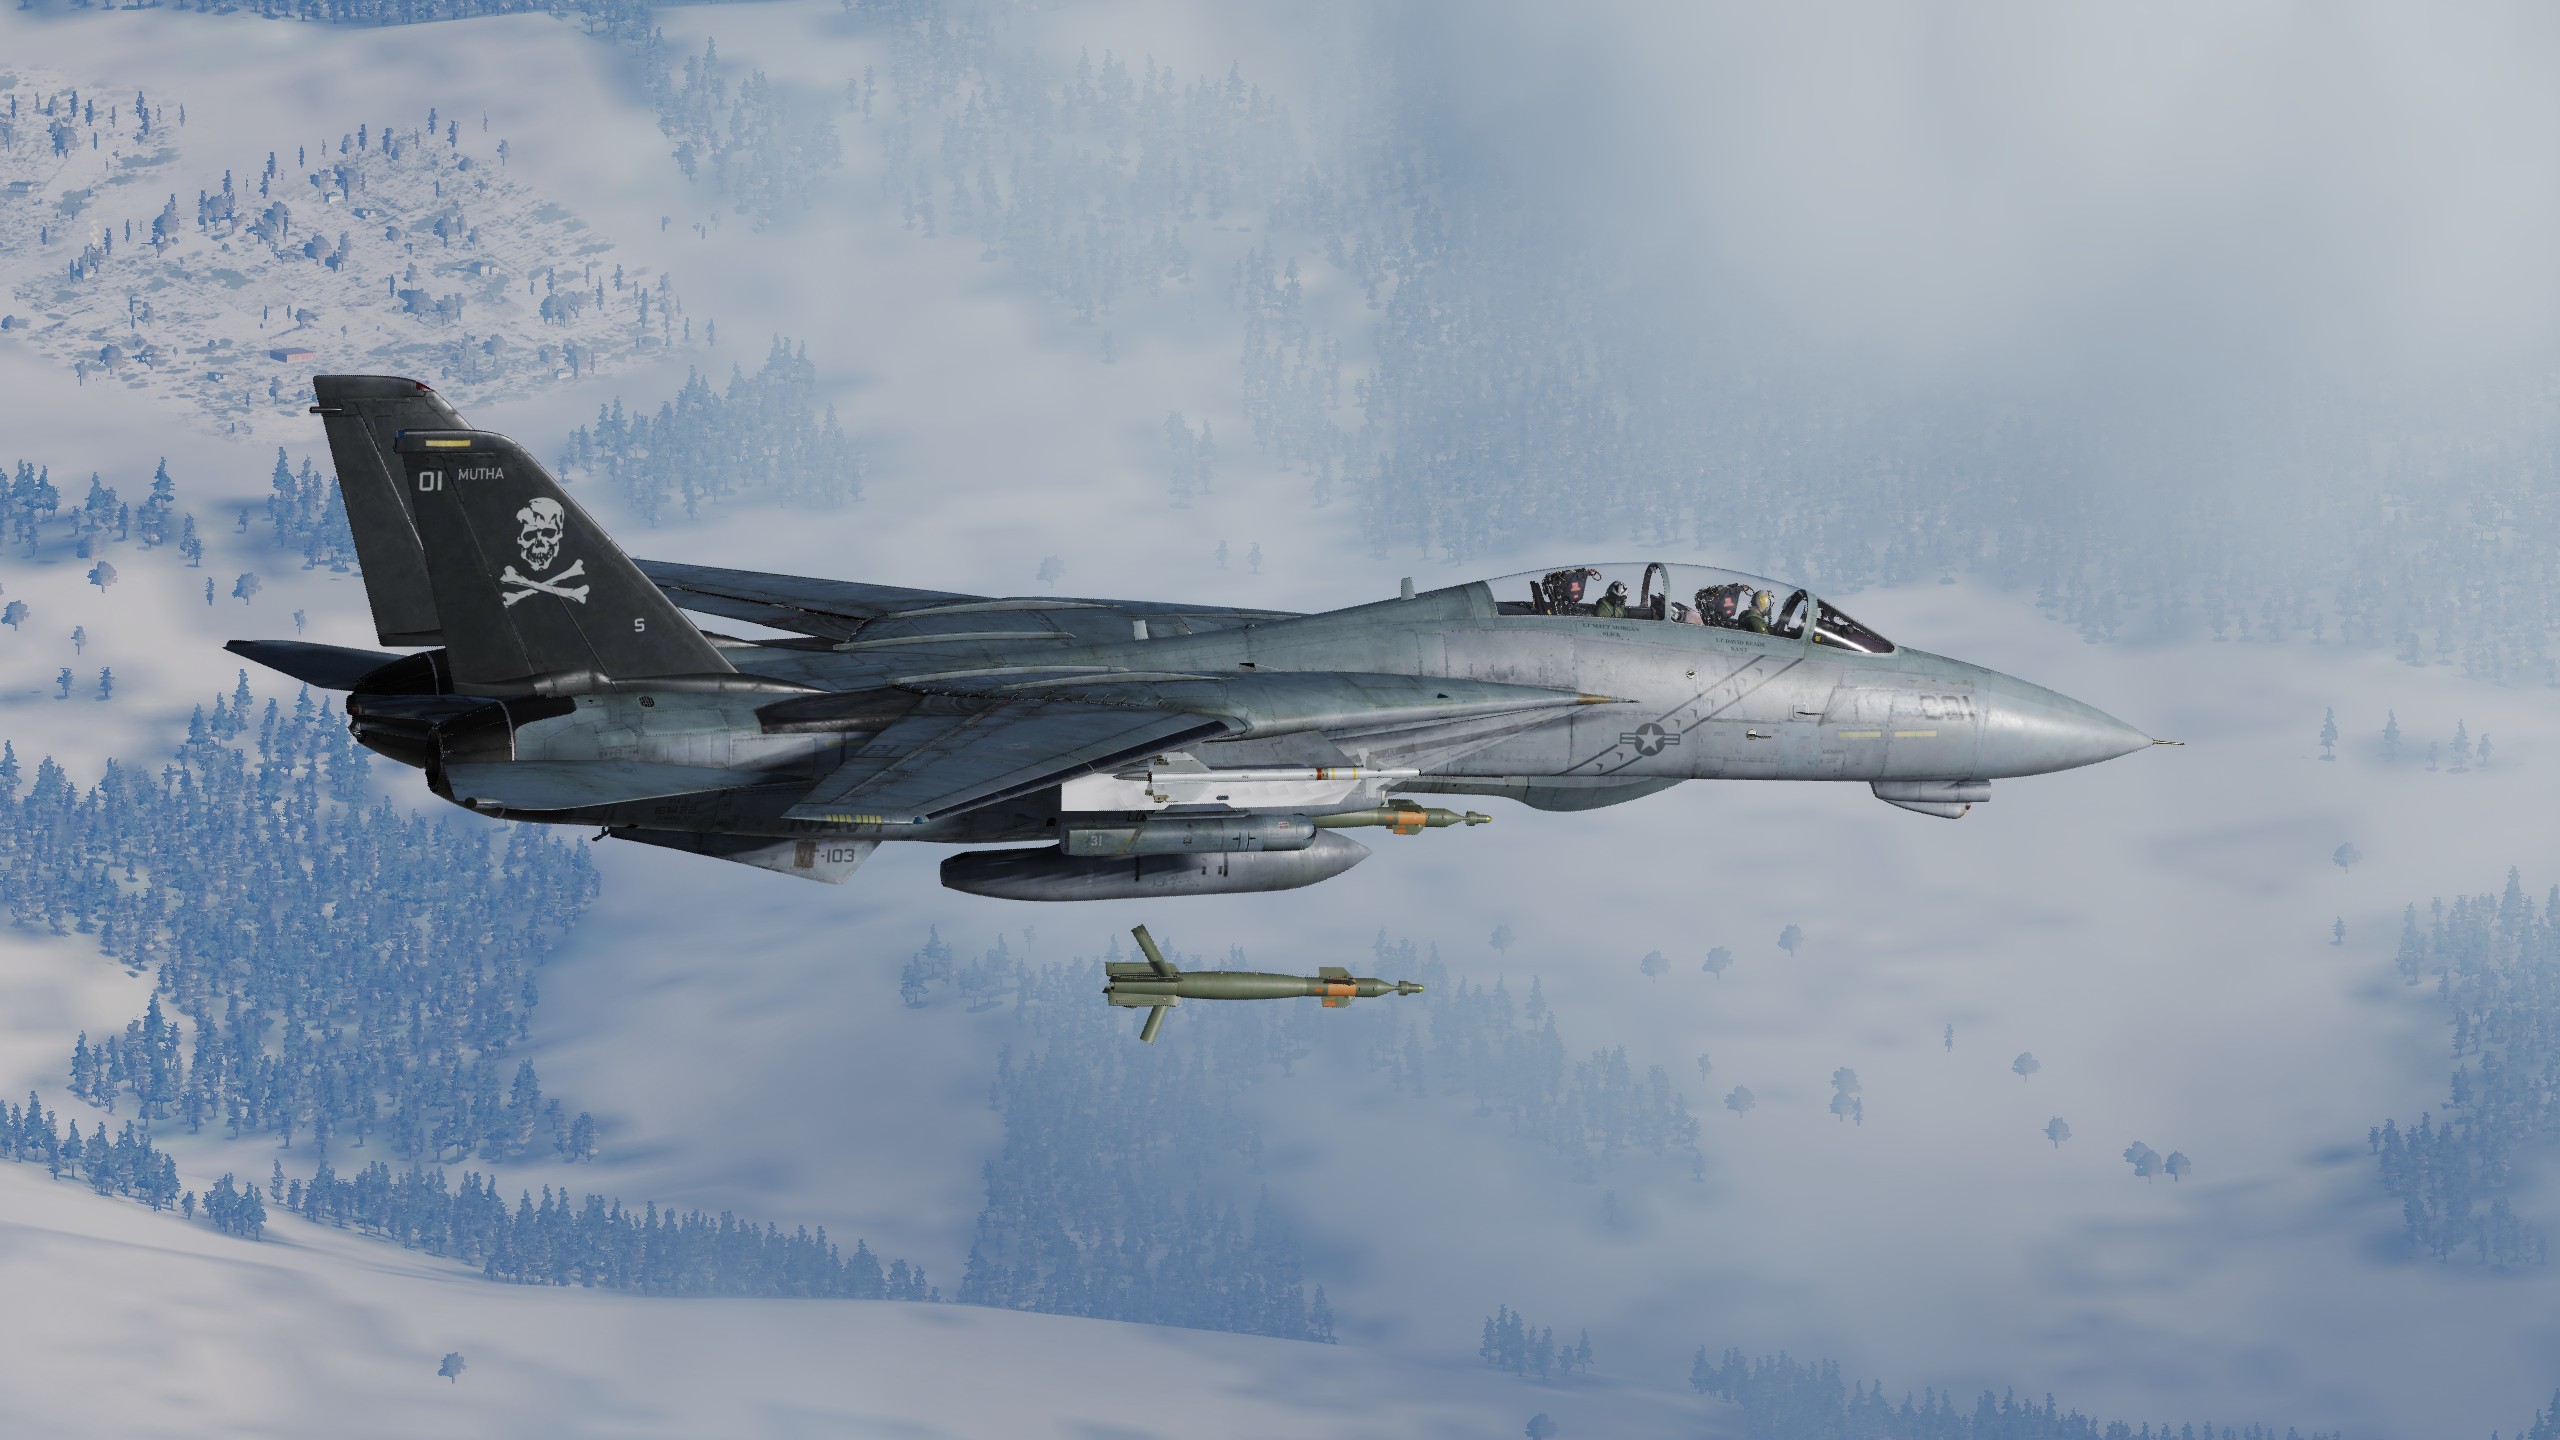 2560x1440 My personal favourite is this one... low vis scheme, Bombcat... <initiate  drooling>